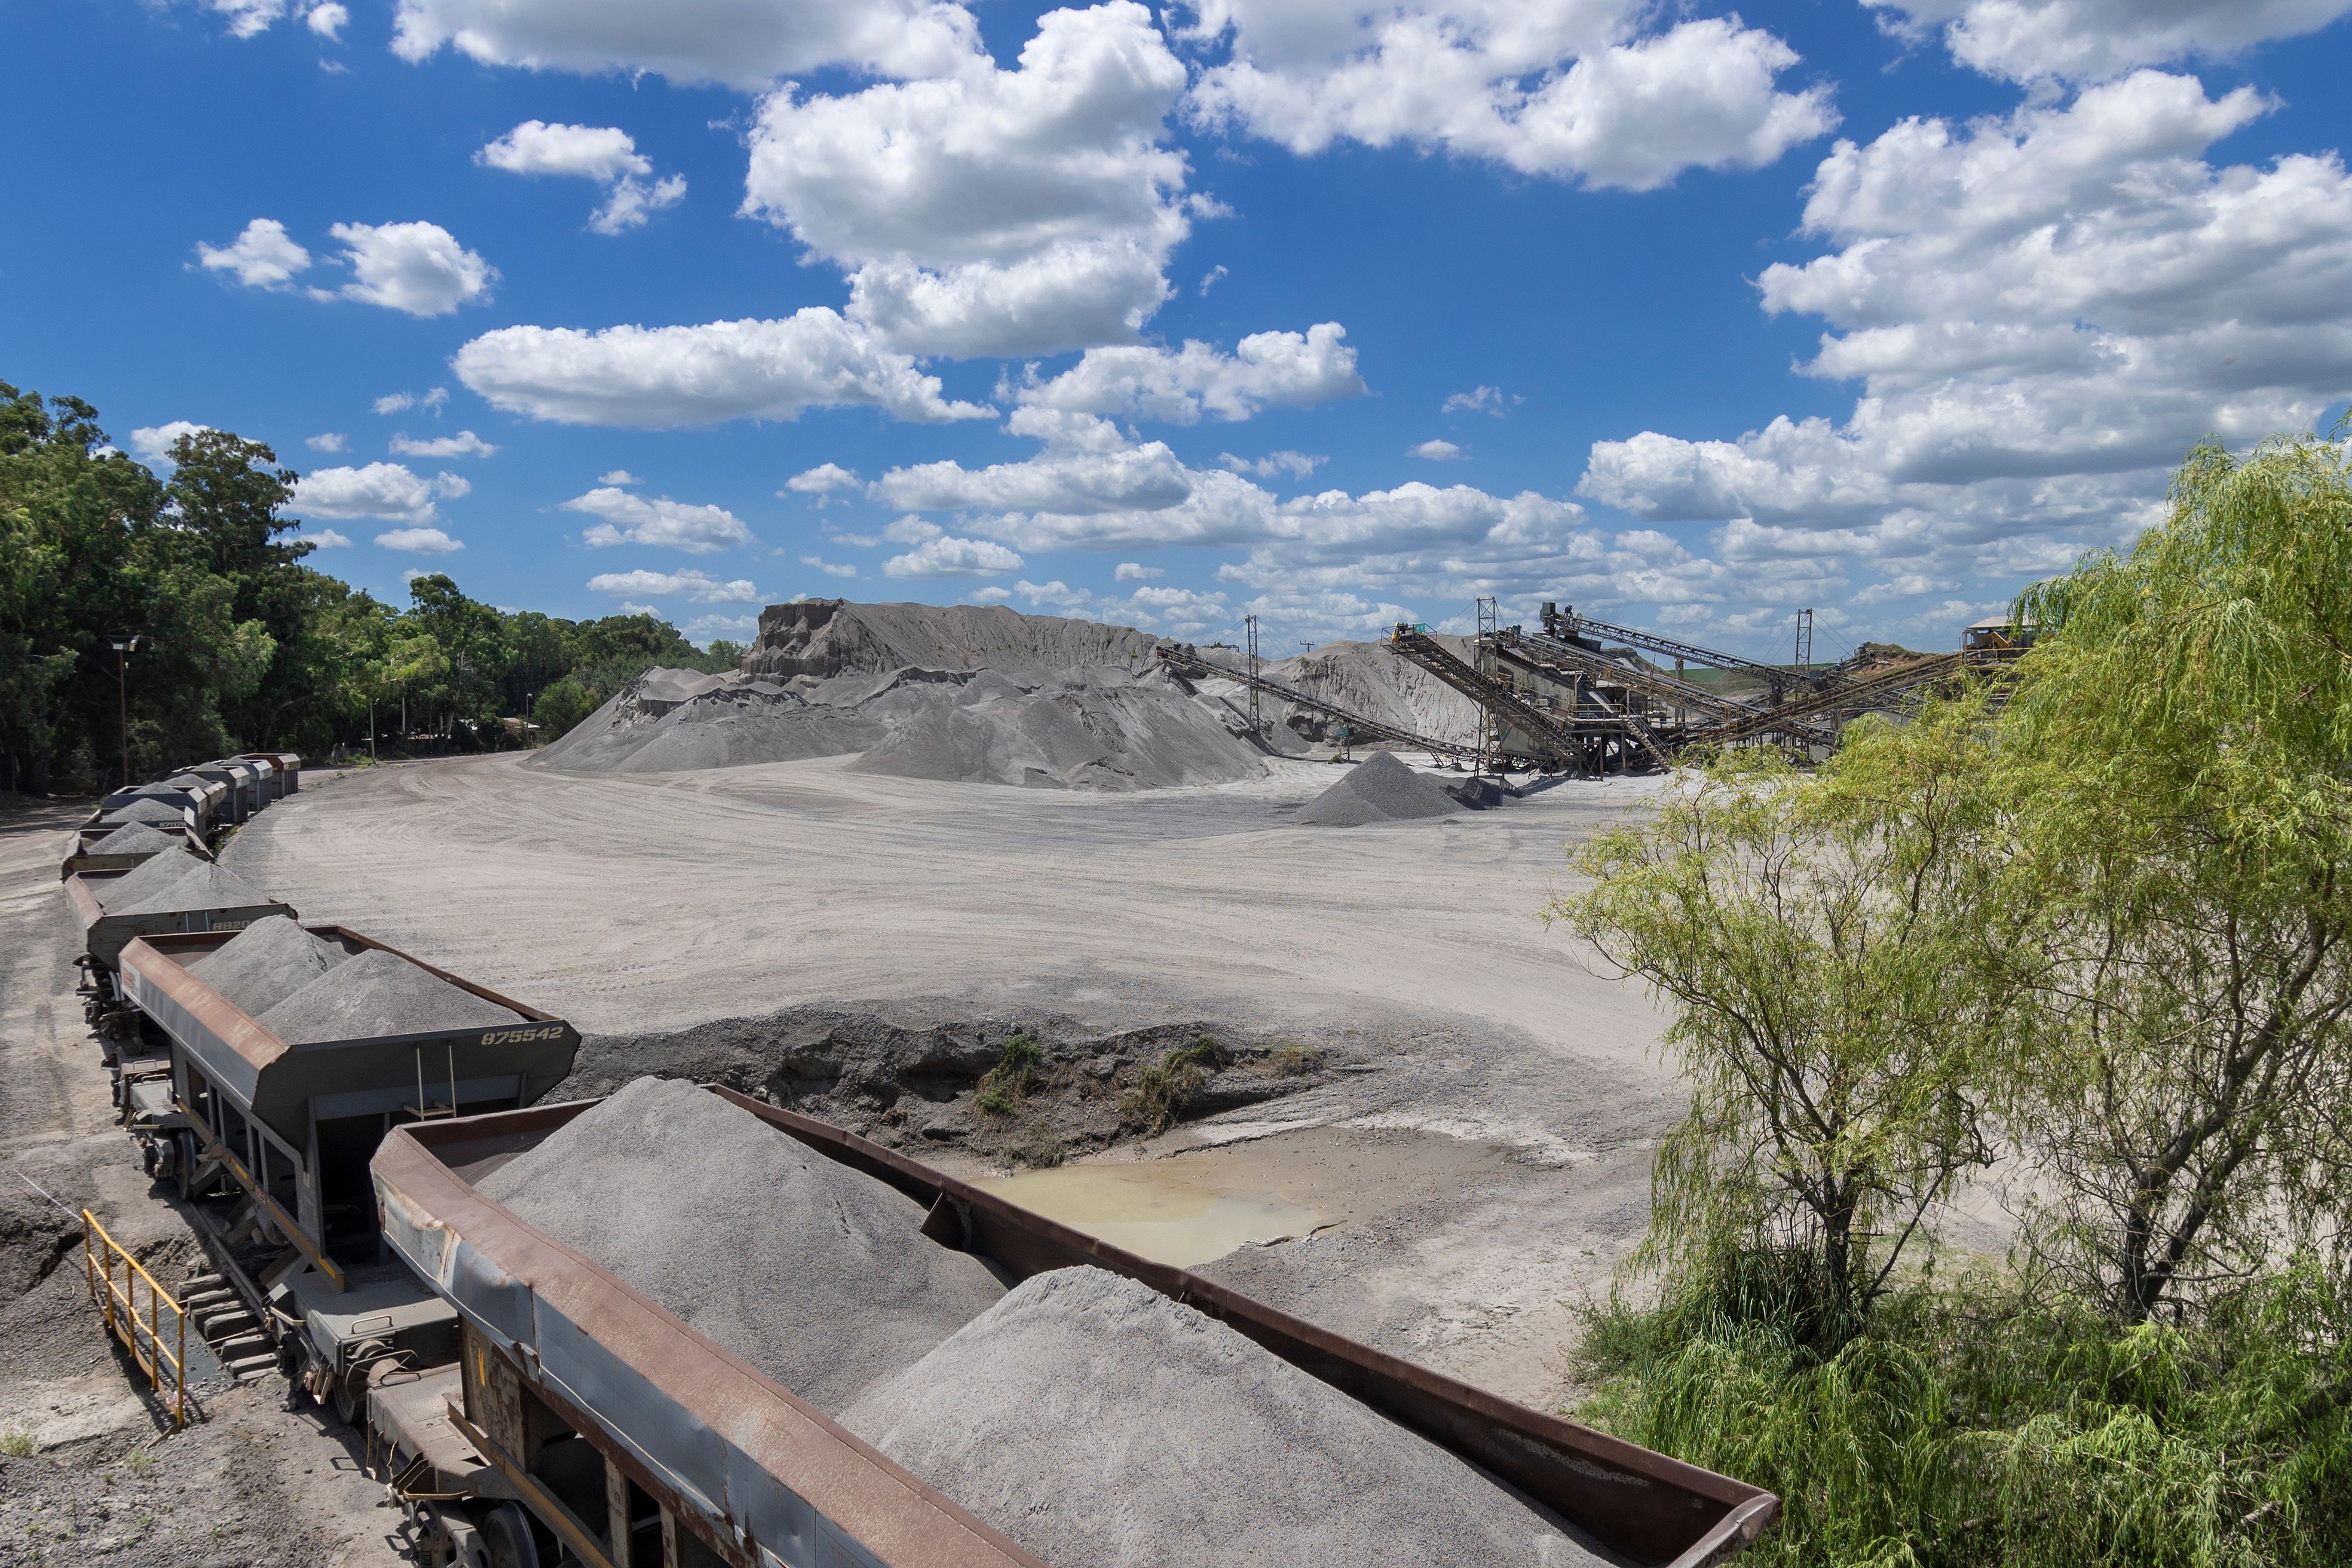 The situation of the industry in Olavarría, the main mining center of Buenos Aires